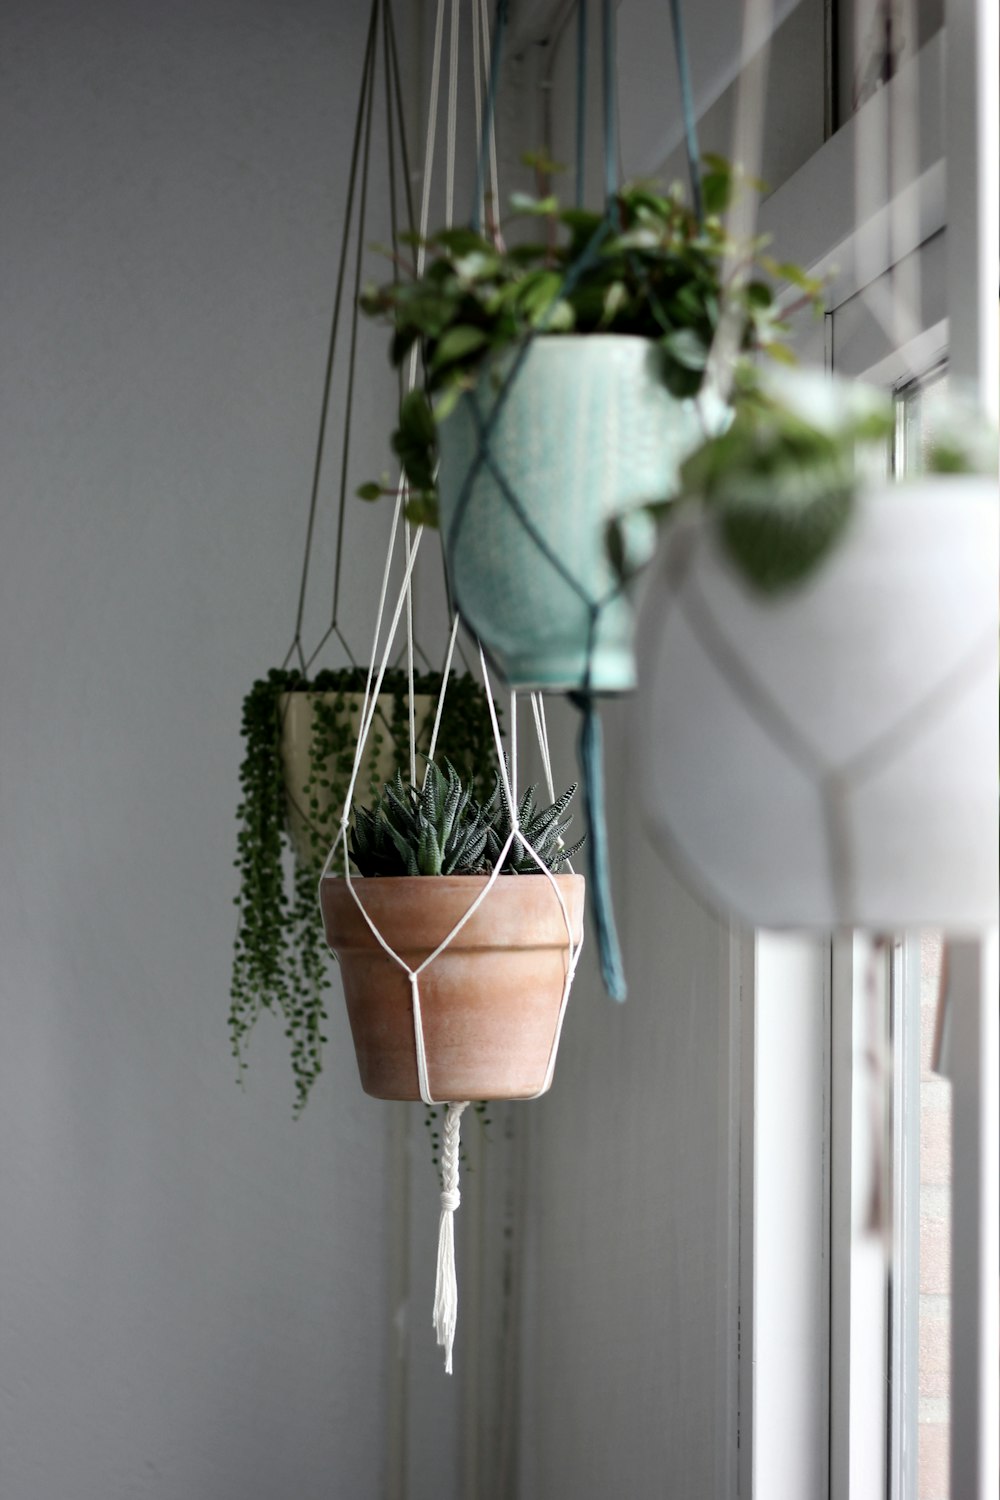 assorted plants with hanging pots near window